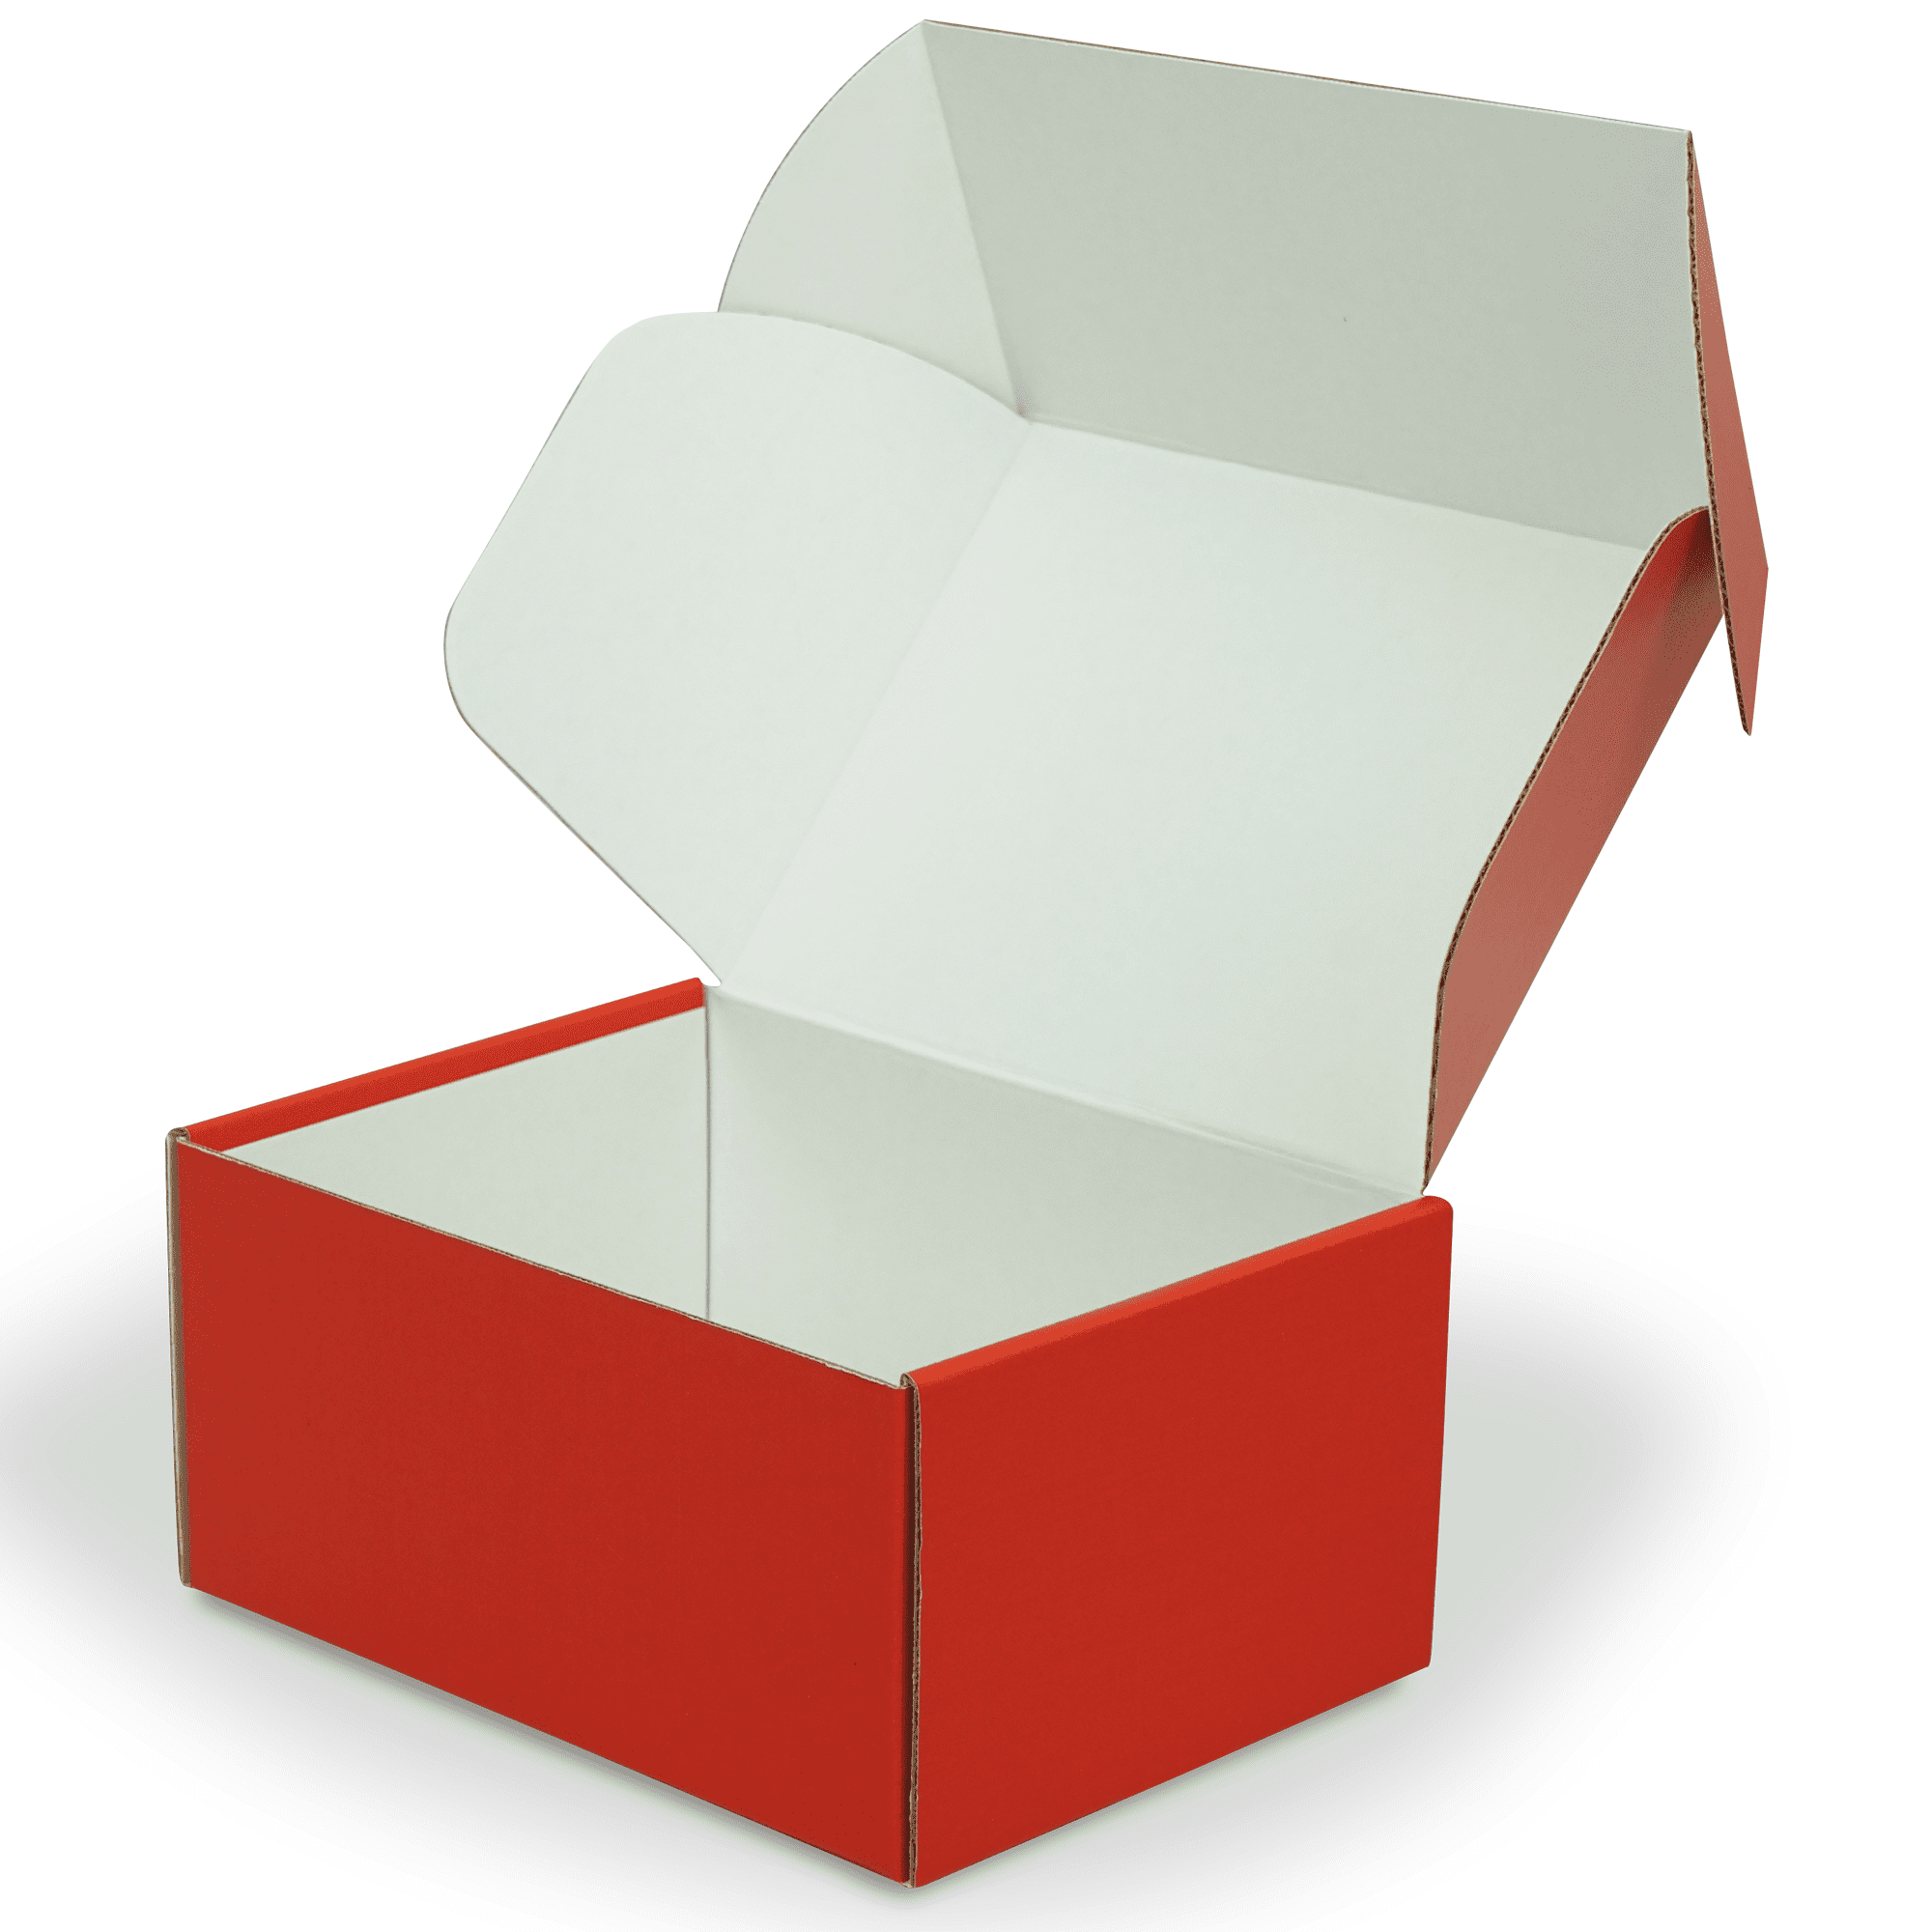 Red Shipping Boxes 6 x 6 x 2 Red Shipping Box Bundle of 20 Mailer Boxes by Fantastapack Red Gift Boxes 